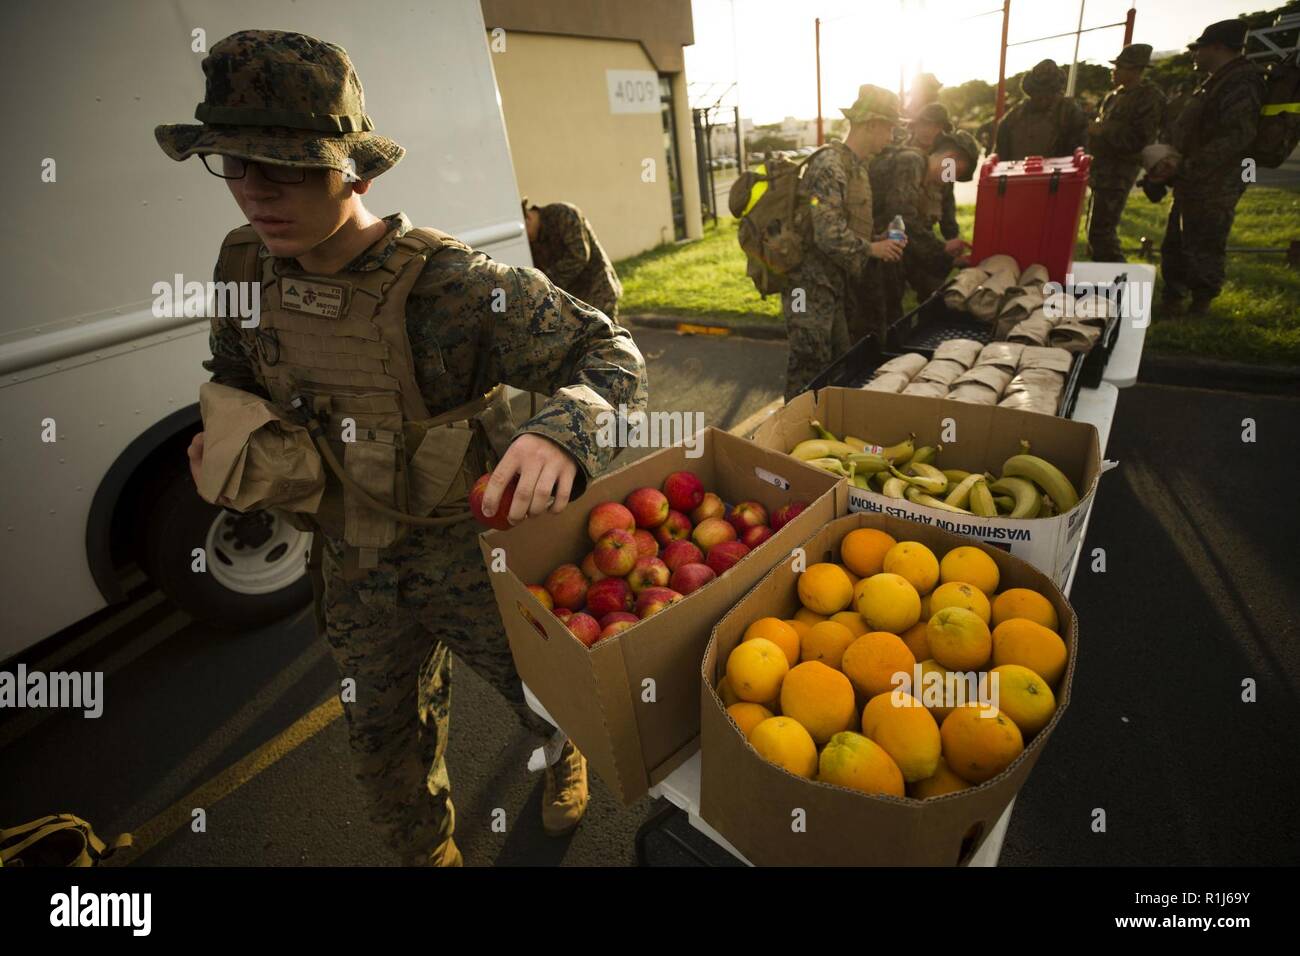 U.S. Marines assigned to Headquarters Battalion, Marine Corps Base Hawaii (MCBH), grab fruit after conducting a battalion hike, MCBH, Oct. 5, 2018. The purpose of the hike was to increase physical and mental stamina, build espirit de corps, and to bolster combat readiness. Stock Photo